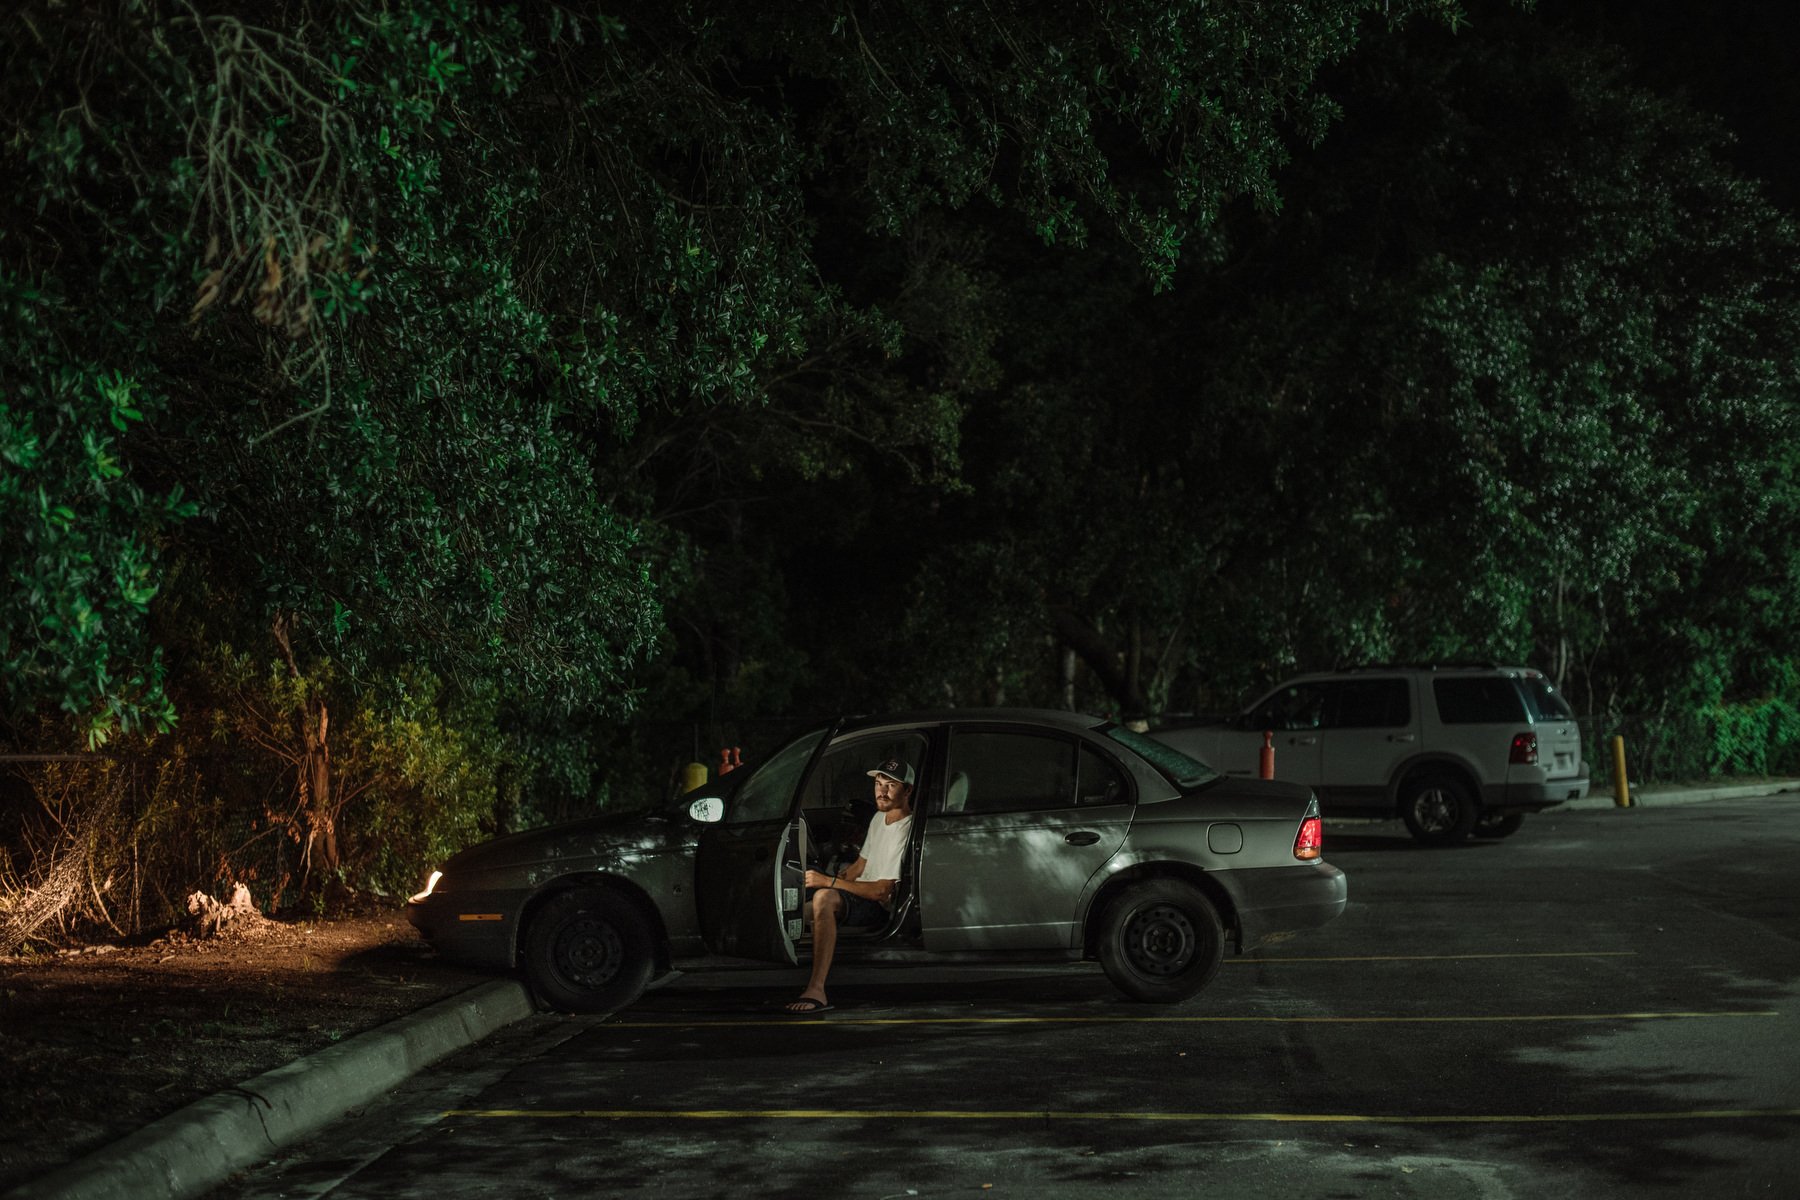 Frankie for The New York Times - Overnight in Walmart Parking Lots: Silence, Solace and Refuge